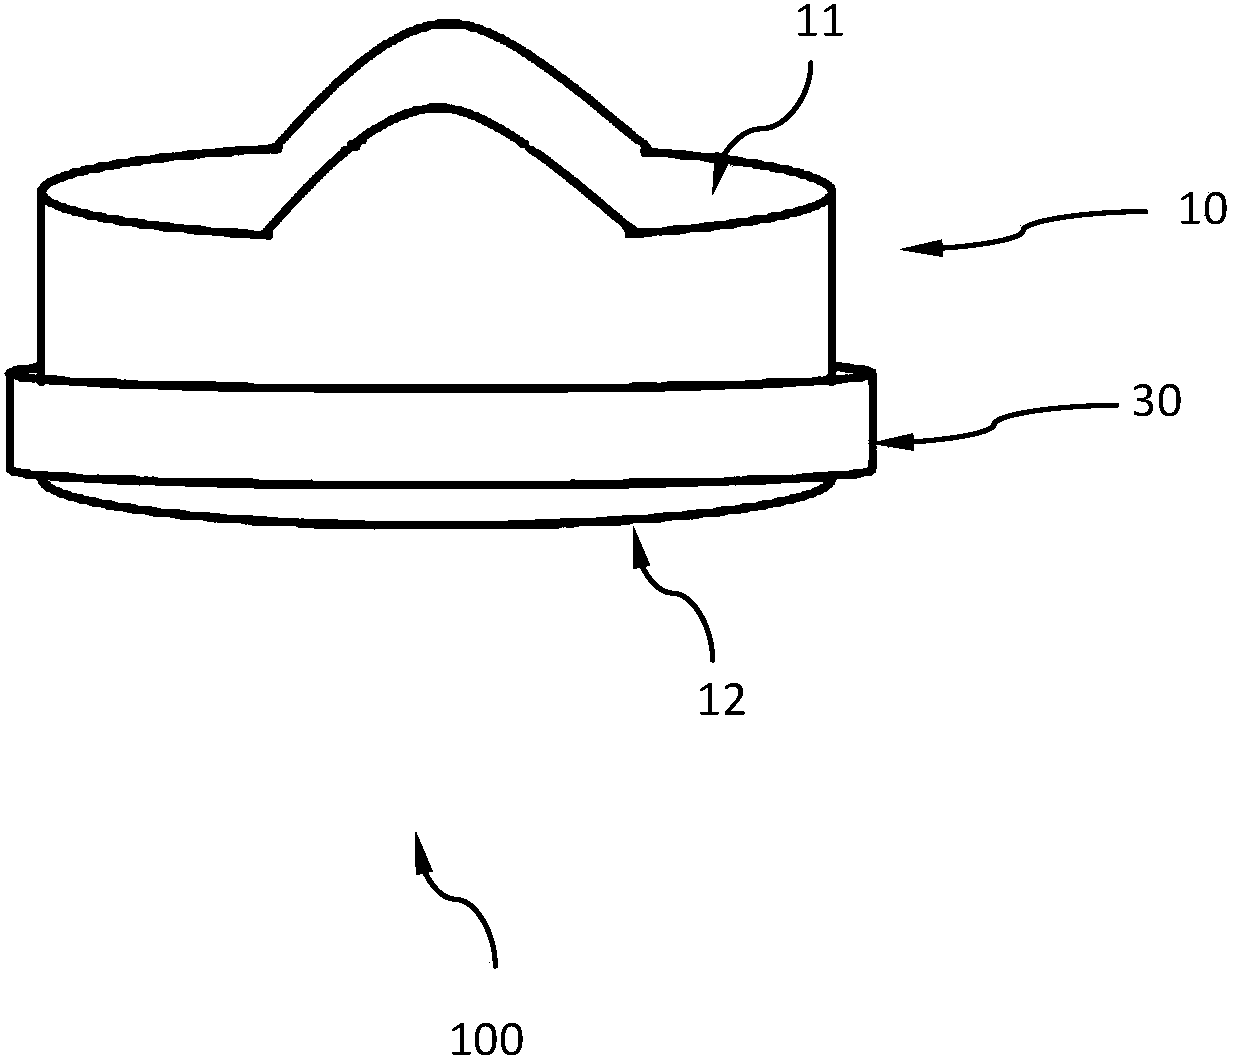 Artificial on-ring mechanical valve for replacing bicuspid valve membrane